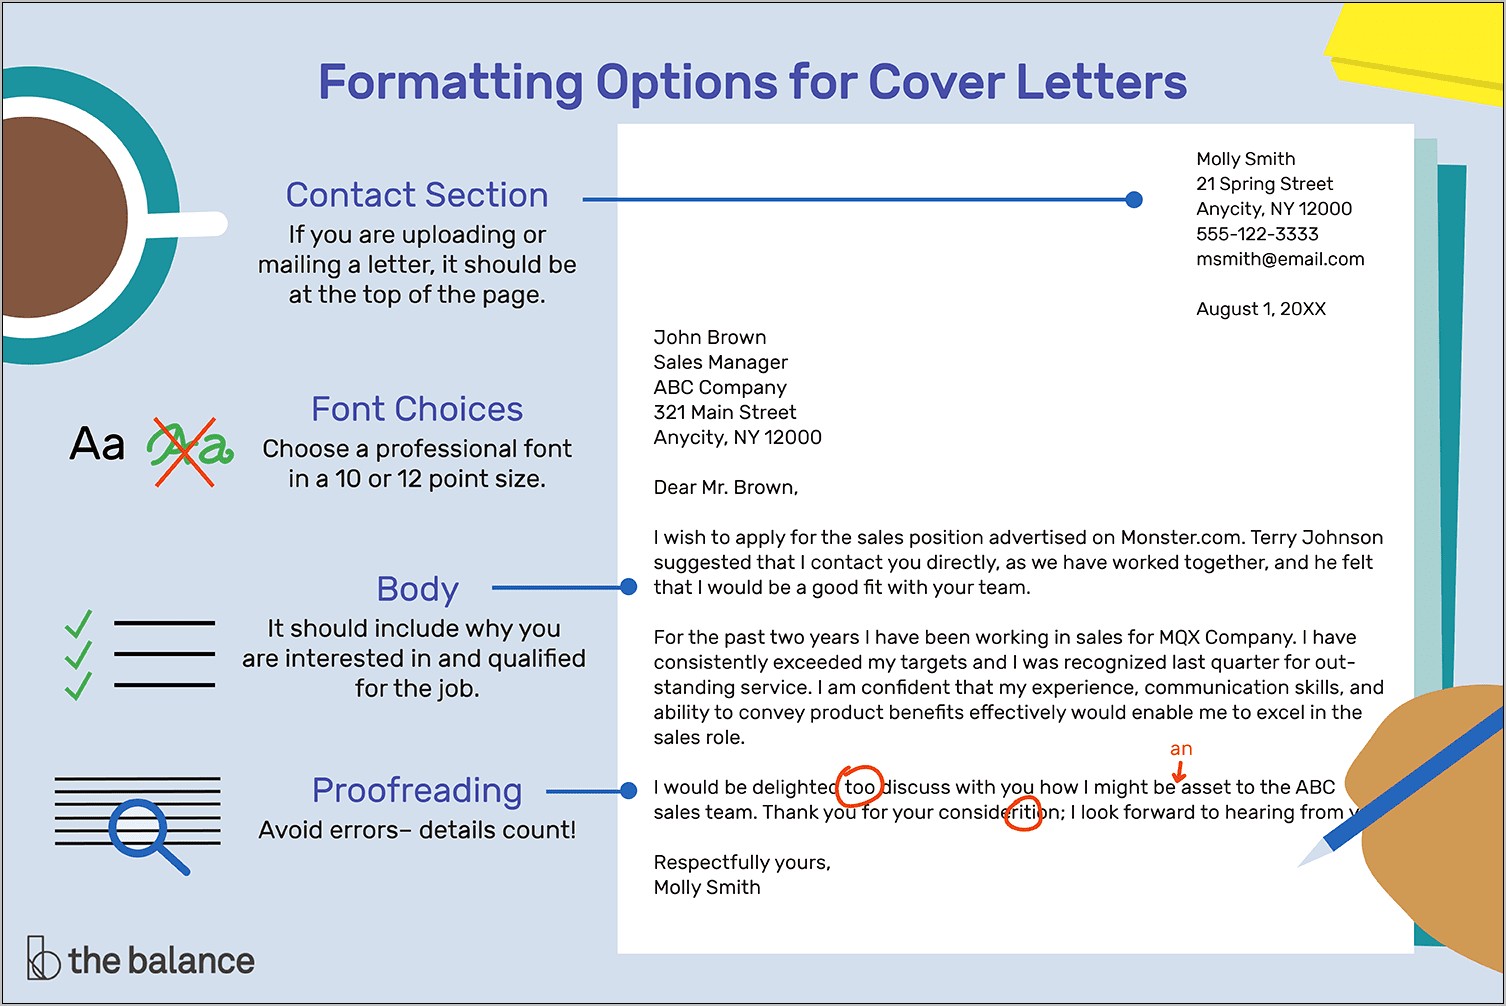 Email Protocol For Resume And Cover Letter